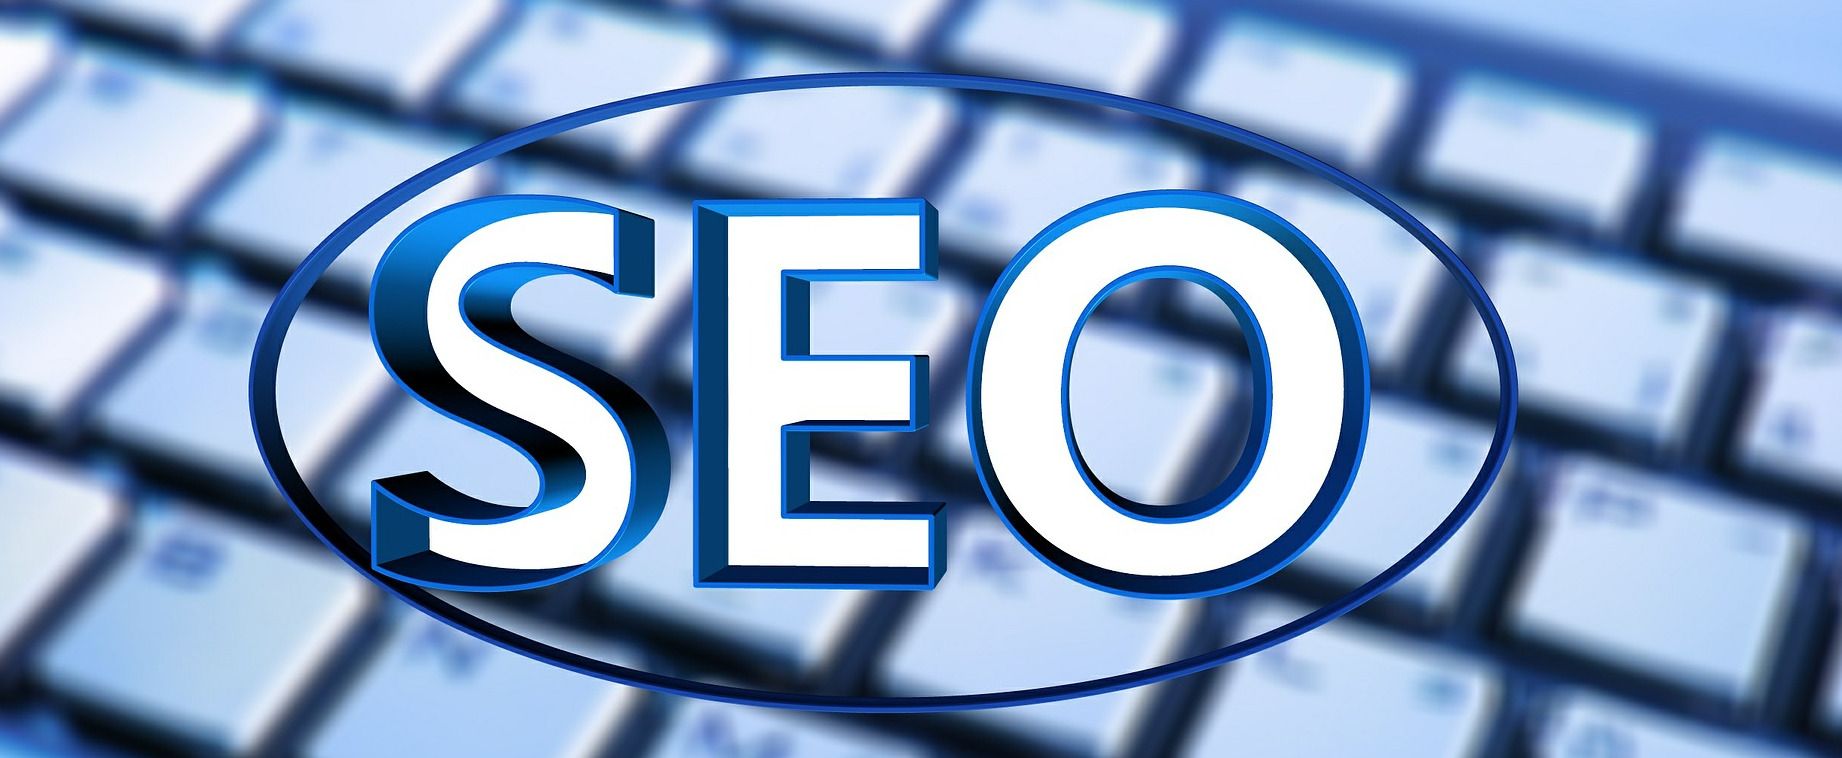 The word “SEO” in huge letters, superimposed on a blurry keyboard